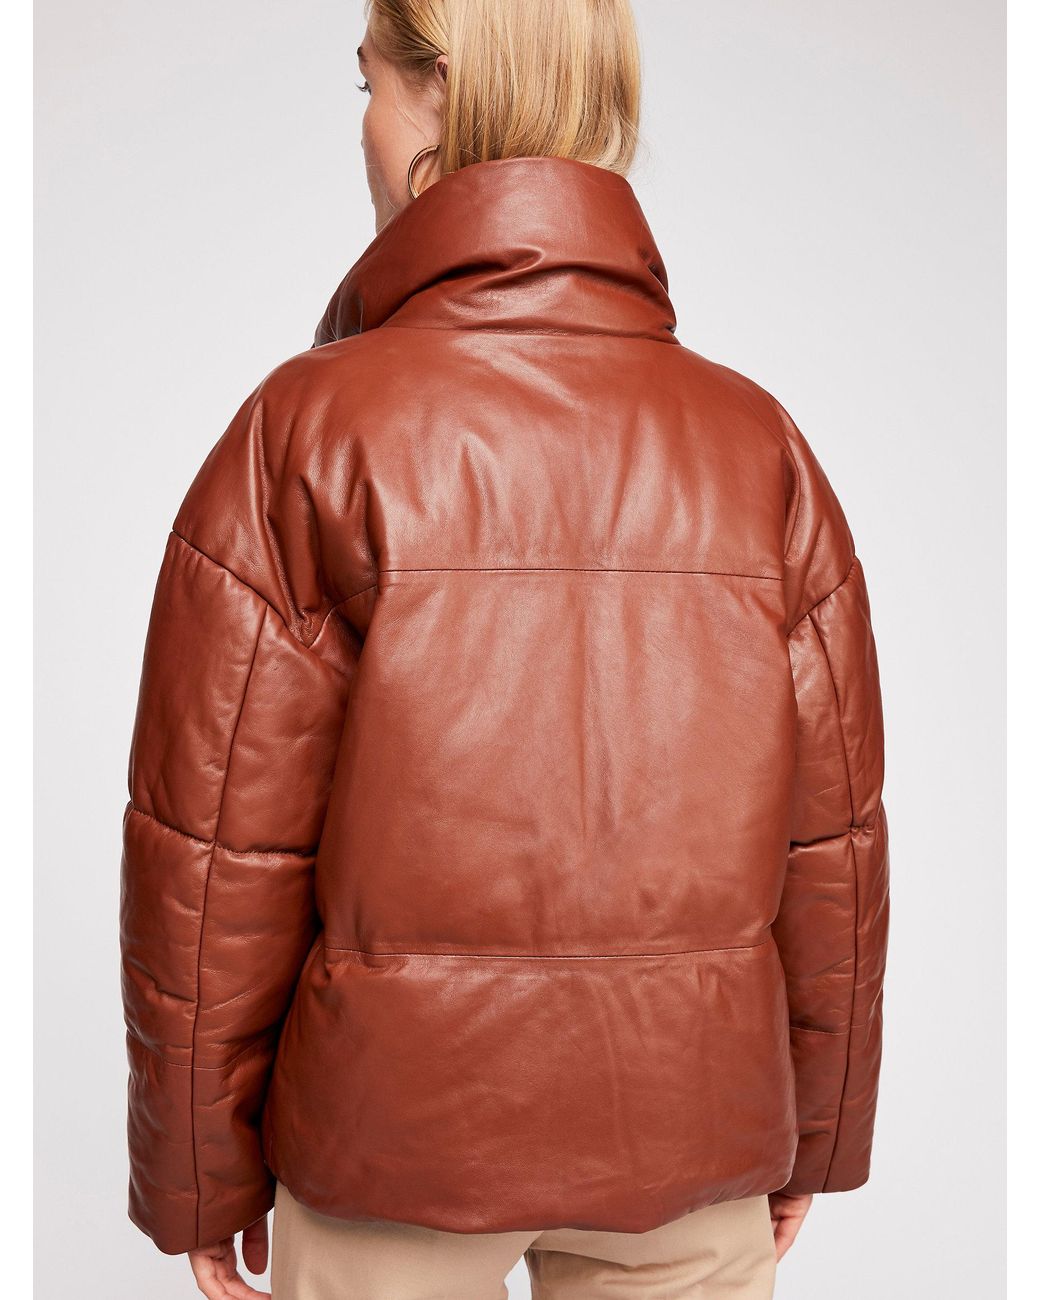 Free People Leather Puffer Jacket in Brown | Lyst